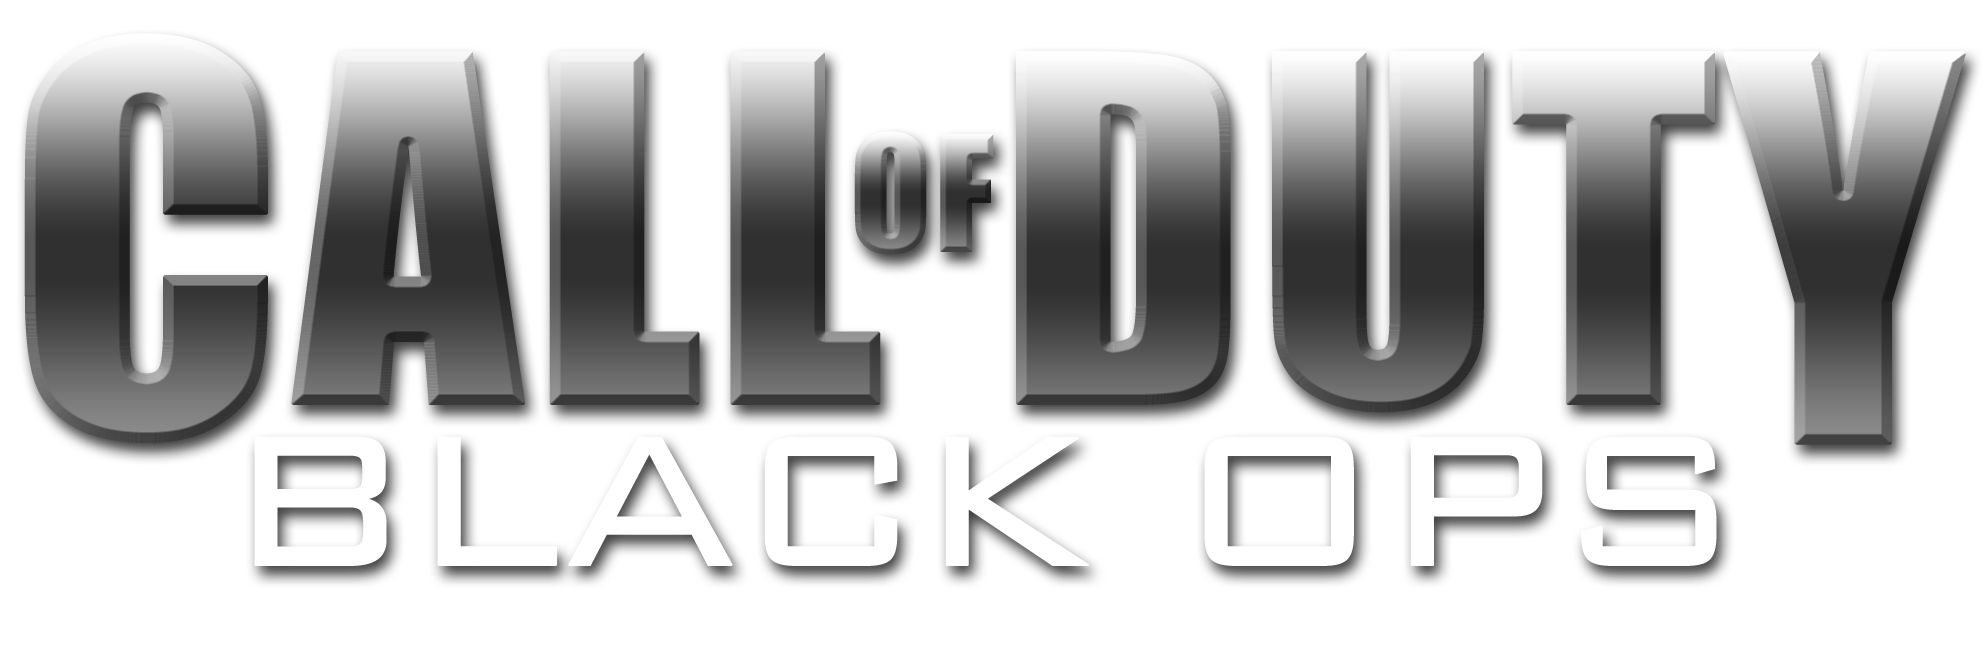 Call Of Duty Black Ops Transparent Image PNG Image